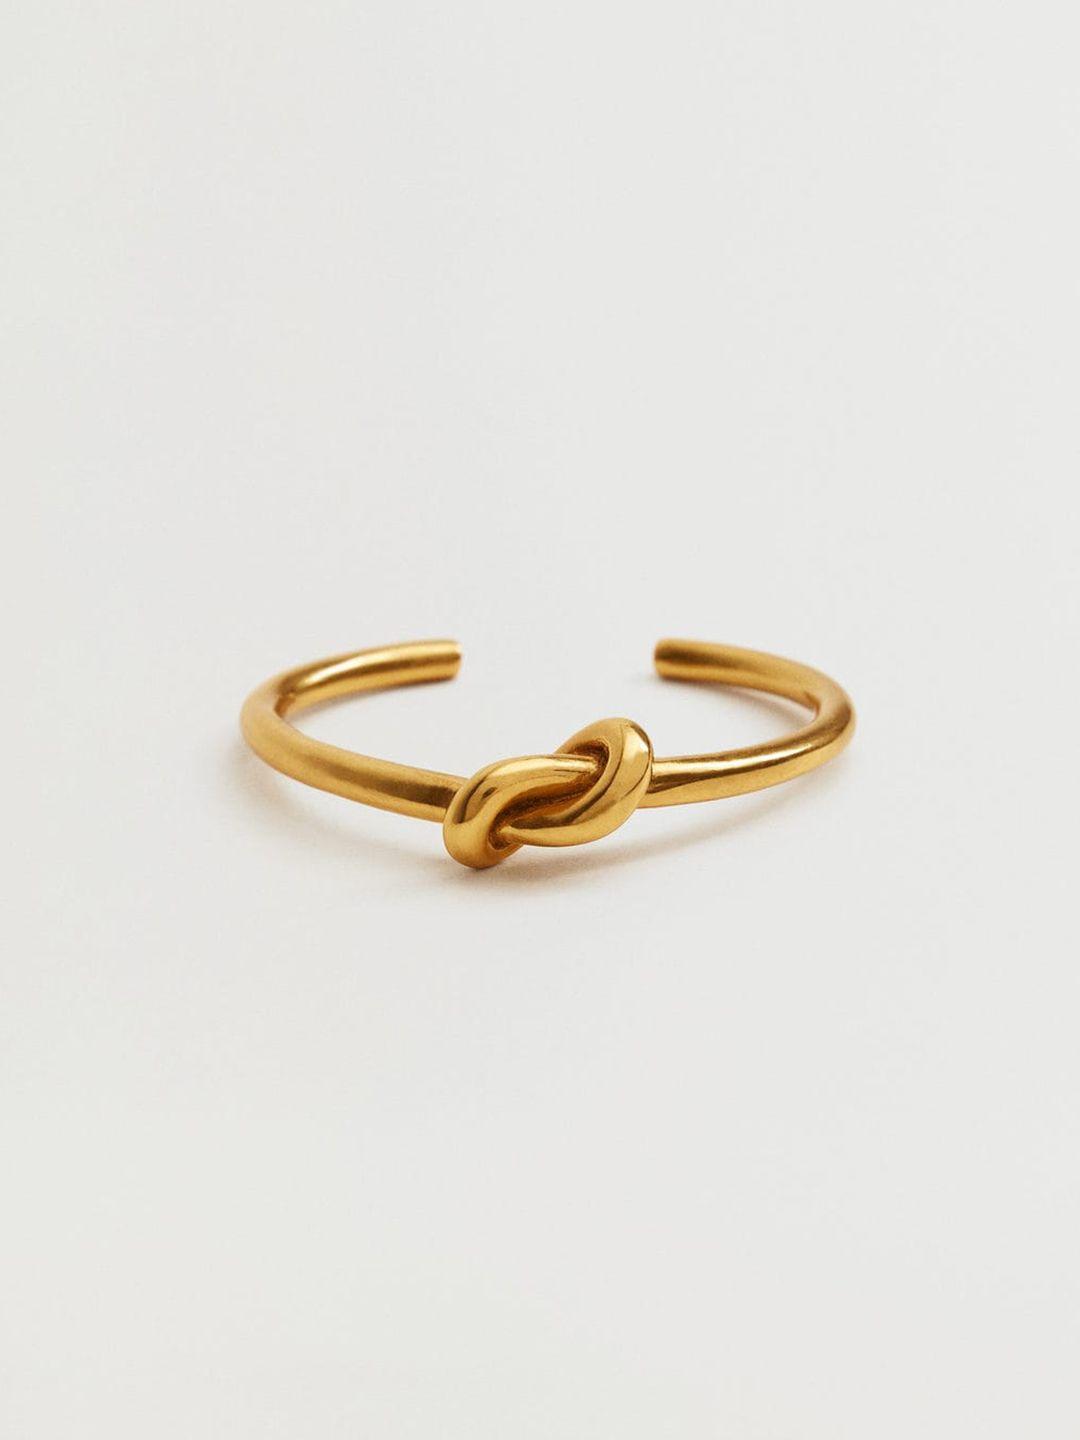 mango-women-24k-gold-plated-cuff-bracelet-with-knot-detail